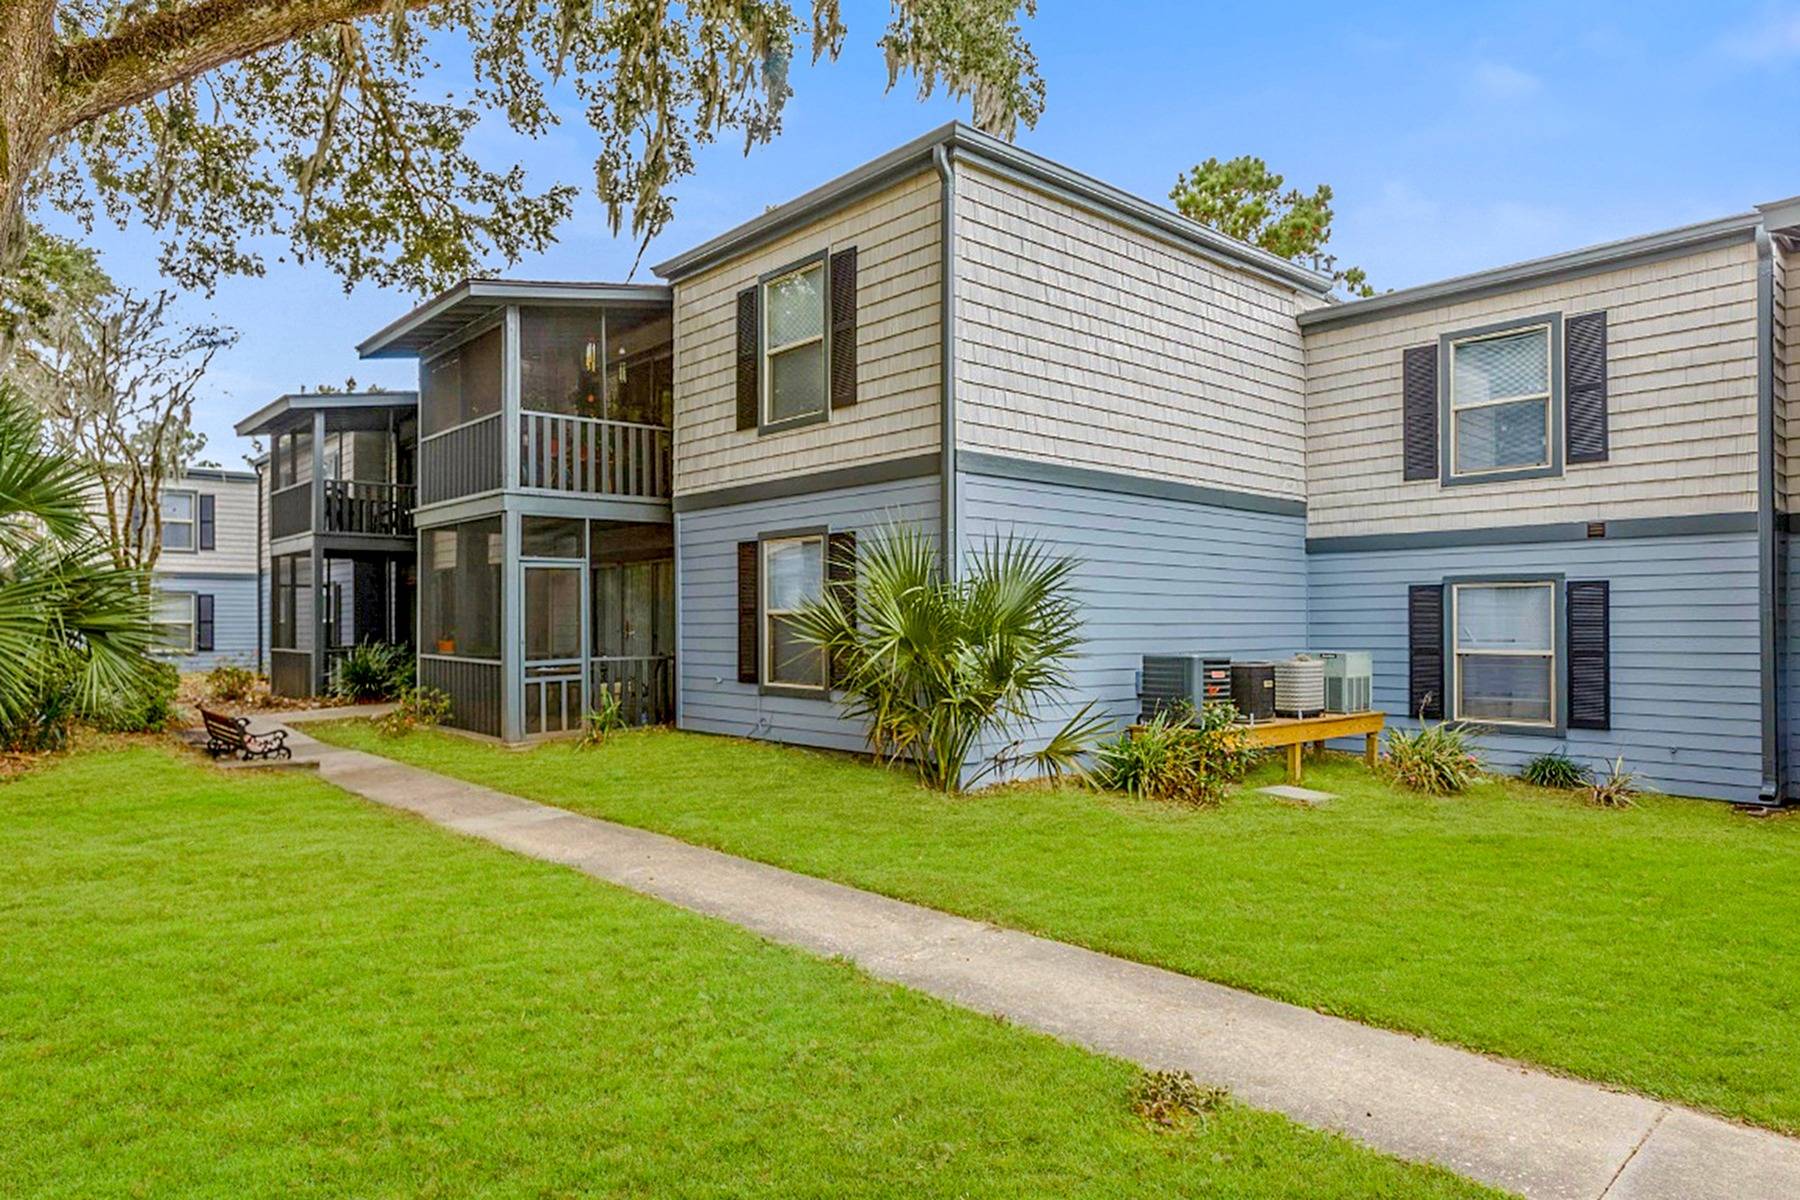 CREC Real Estate and Rincon Capital Partners Acquire Planters Trace Apartment Community in Charleston’s West Ashley Neighborhood